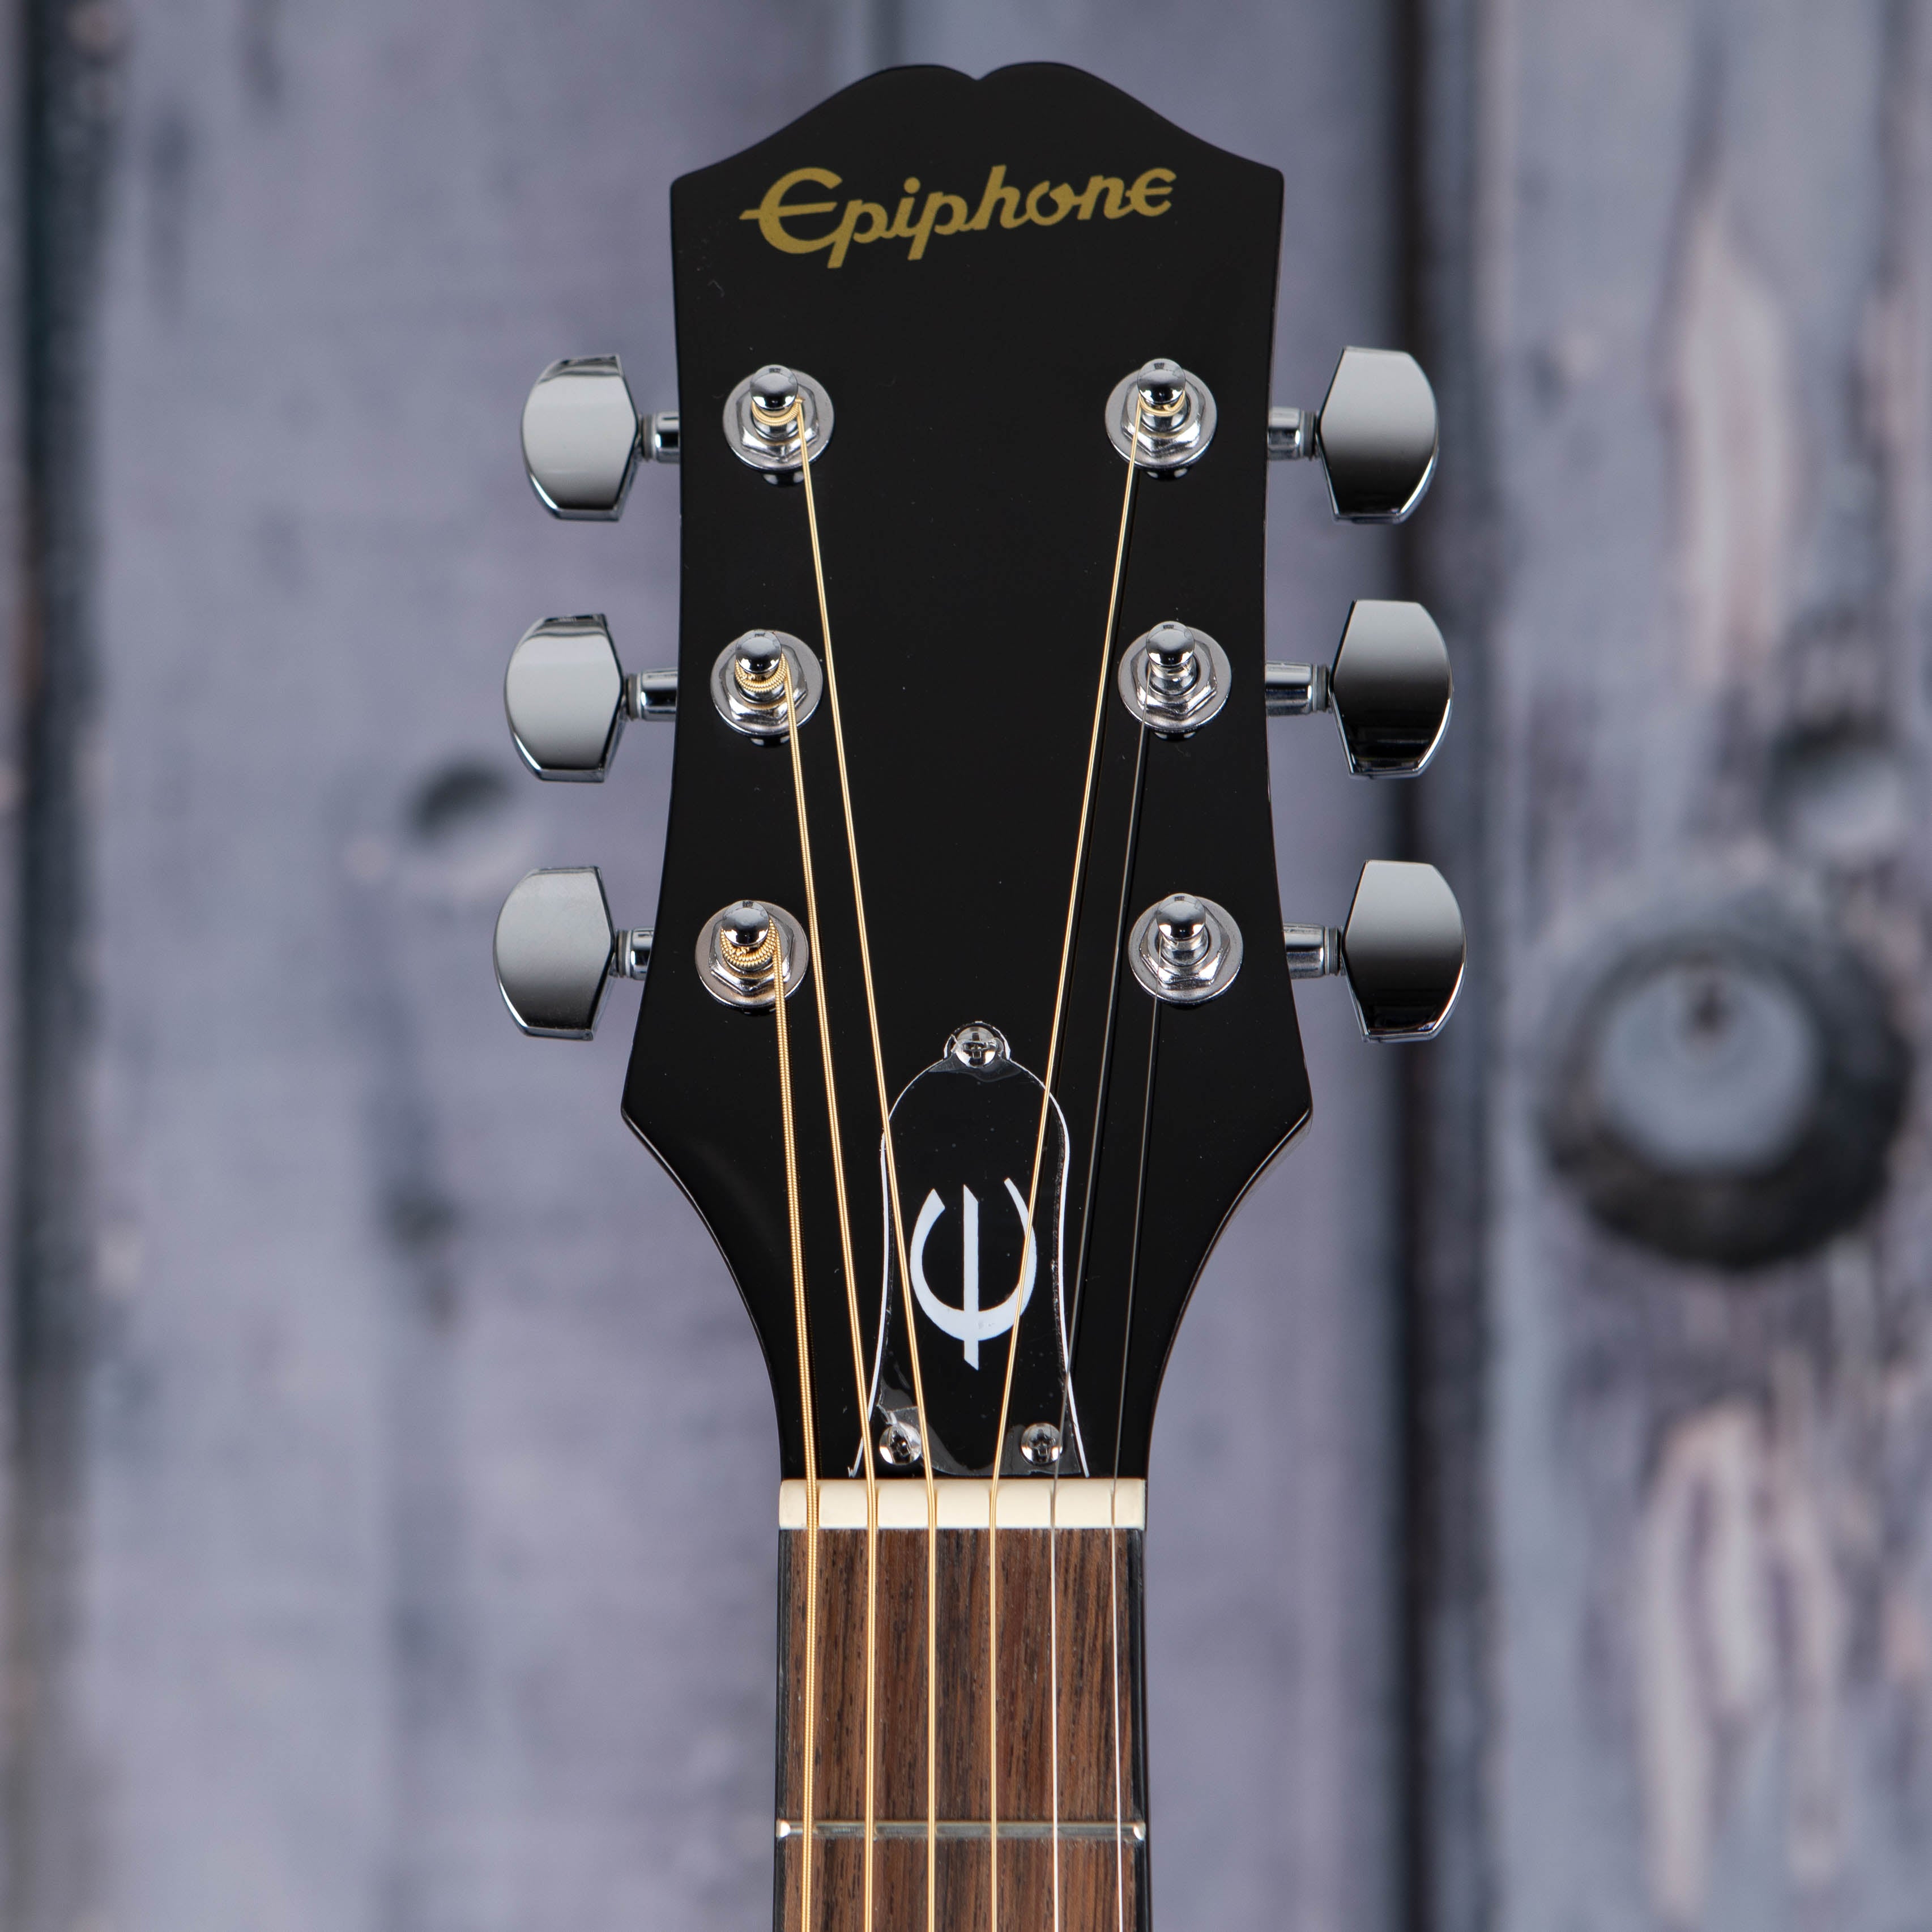 Epiphone Starling Acoustic Guitar, Ebony, front headstock